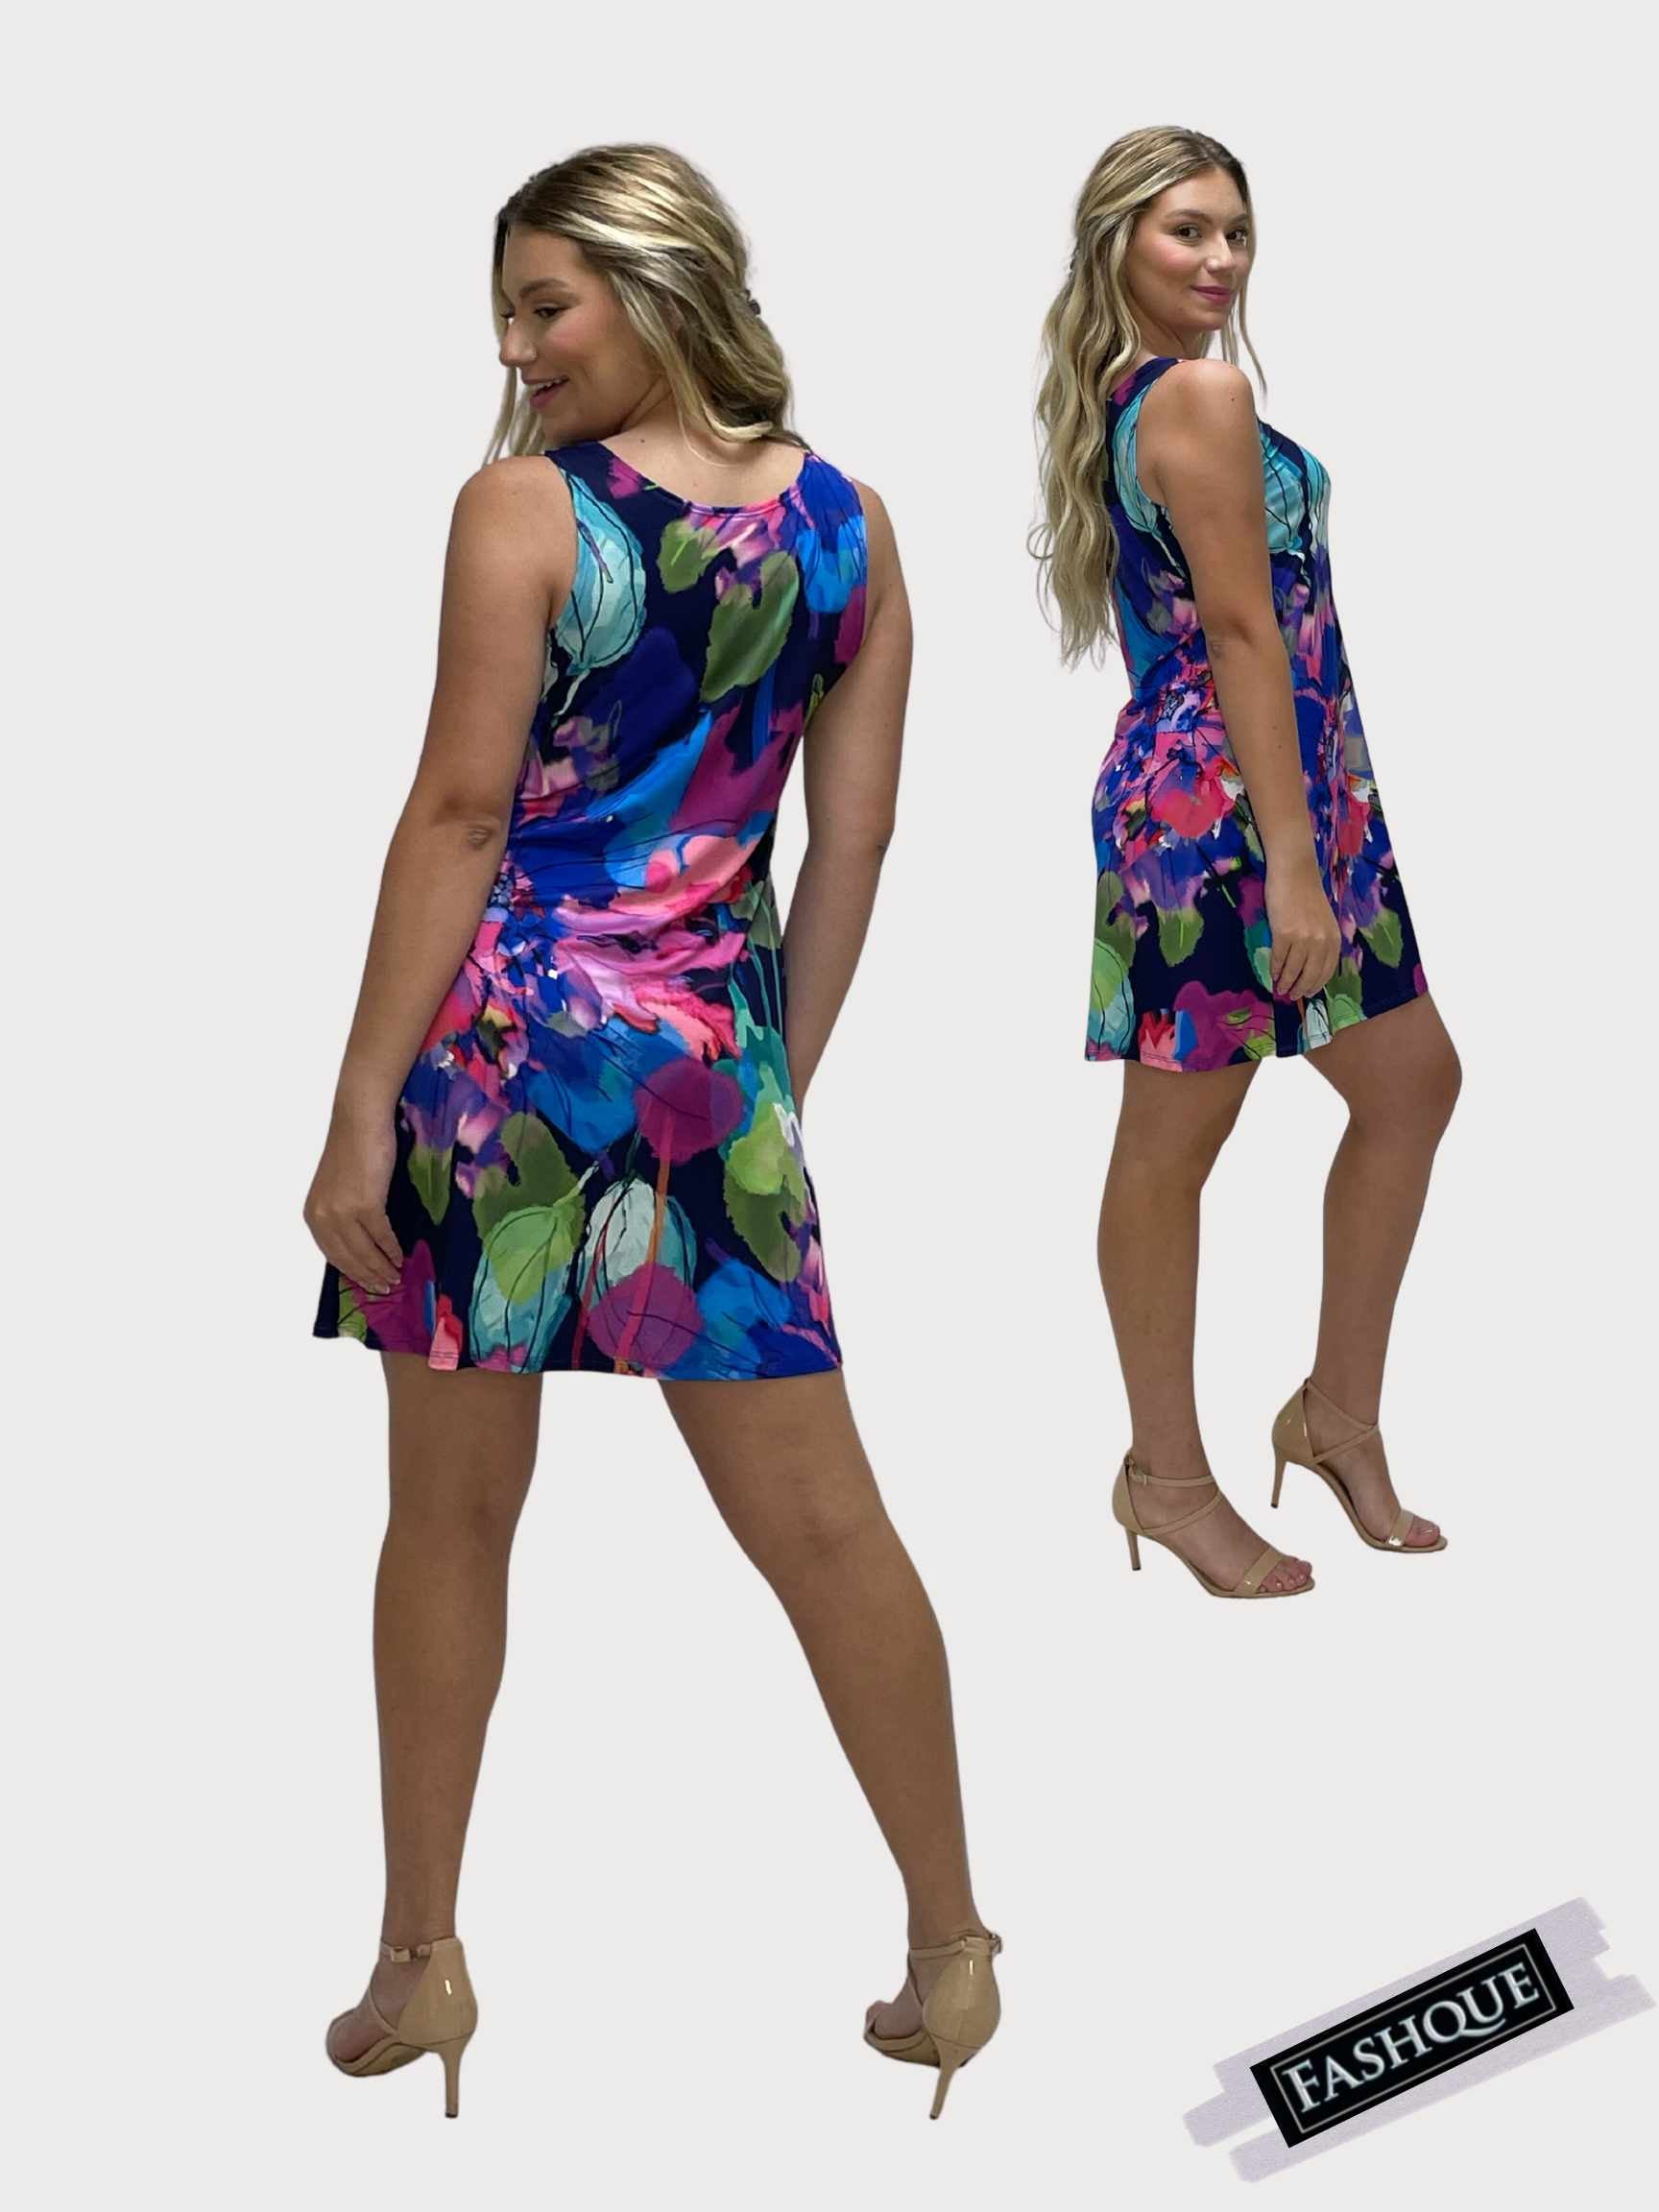 Print #8024 - FASHQUE - Sleeveless Scoop Neck Pull-Over Style Dress - D2002